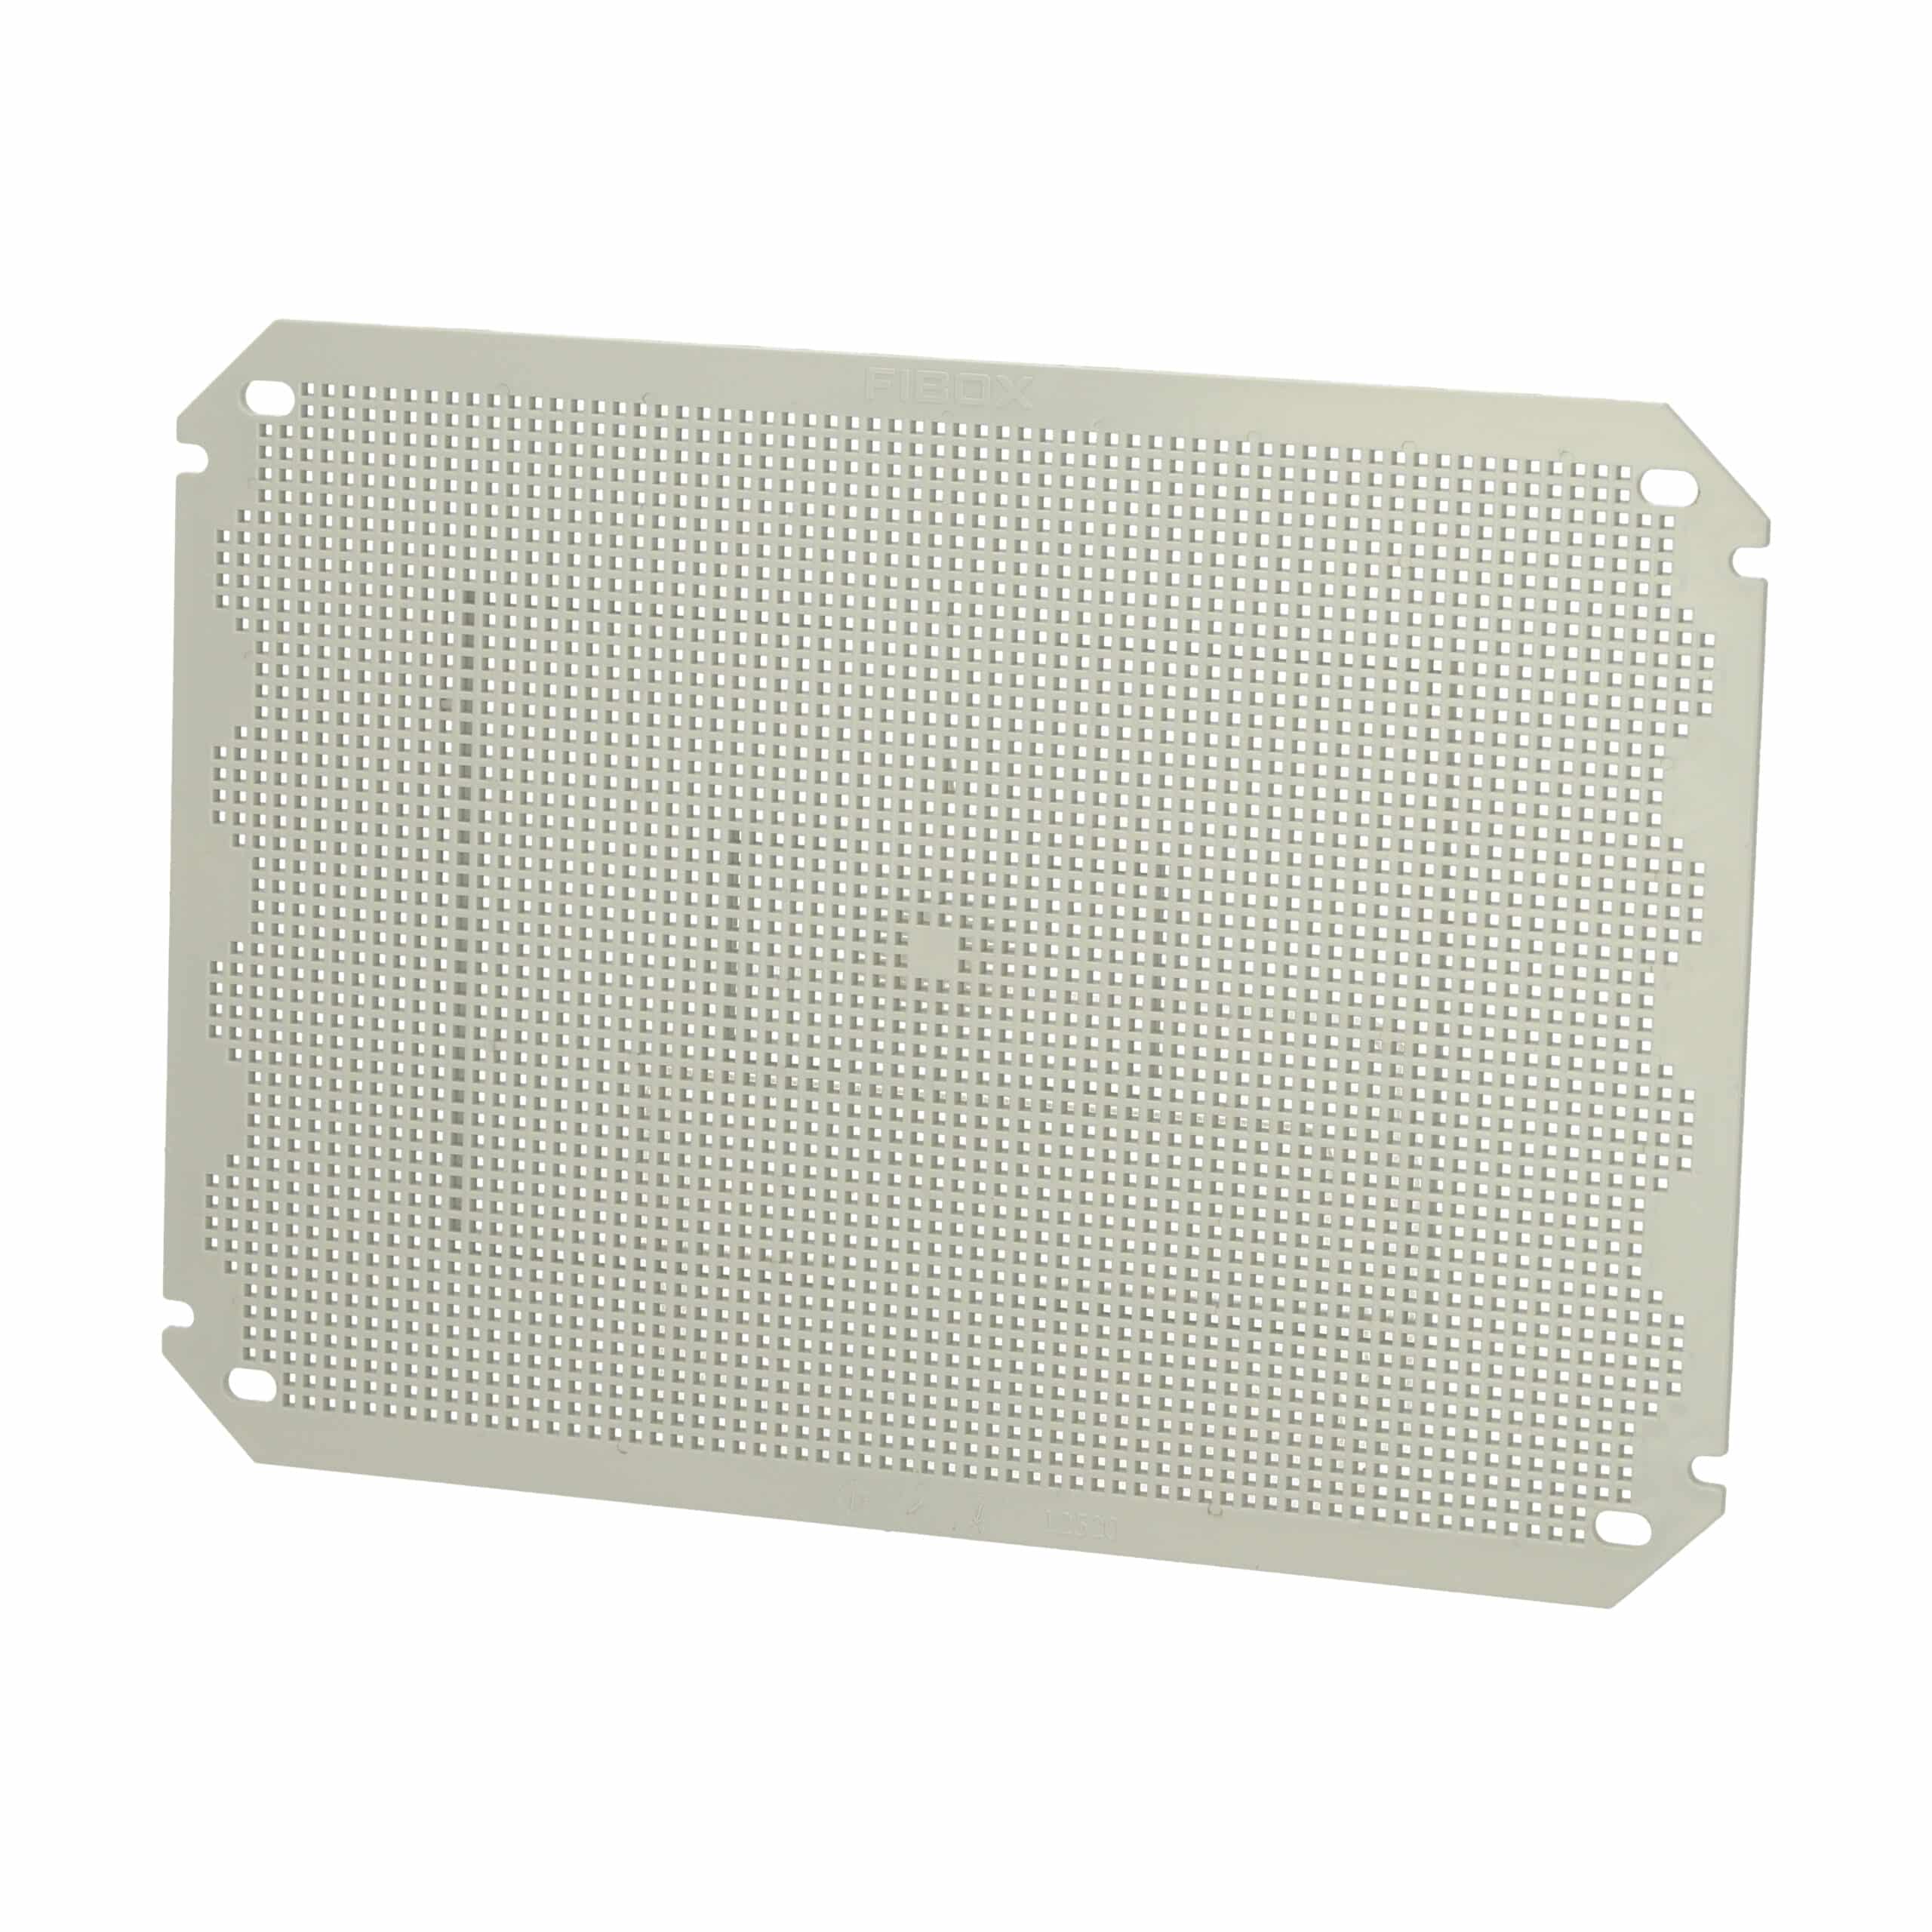 Fibox NEO perforated mounting plate 32mm x 22mm (4850070)